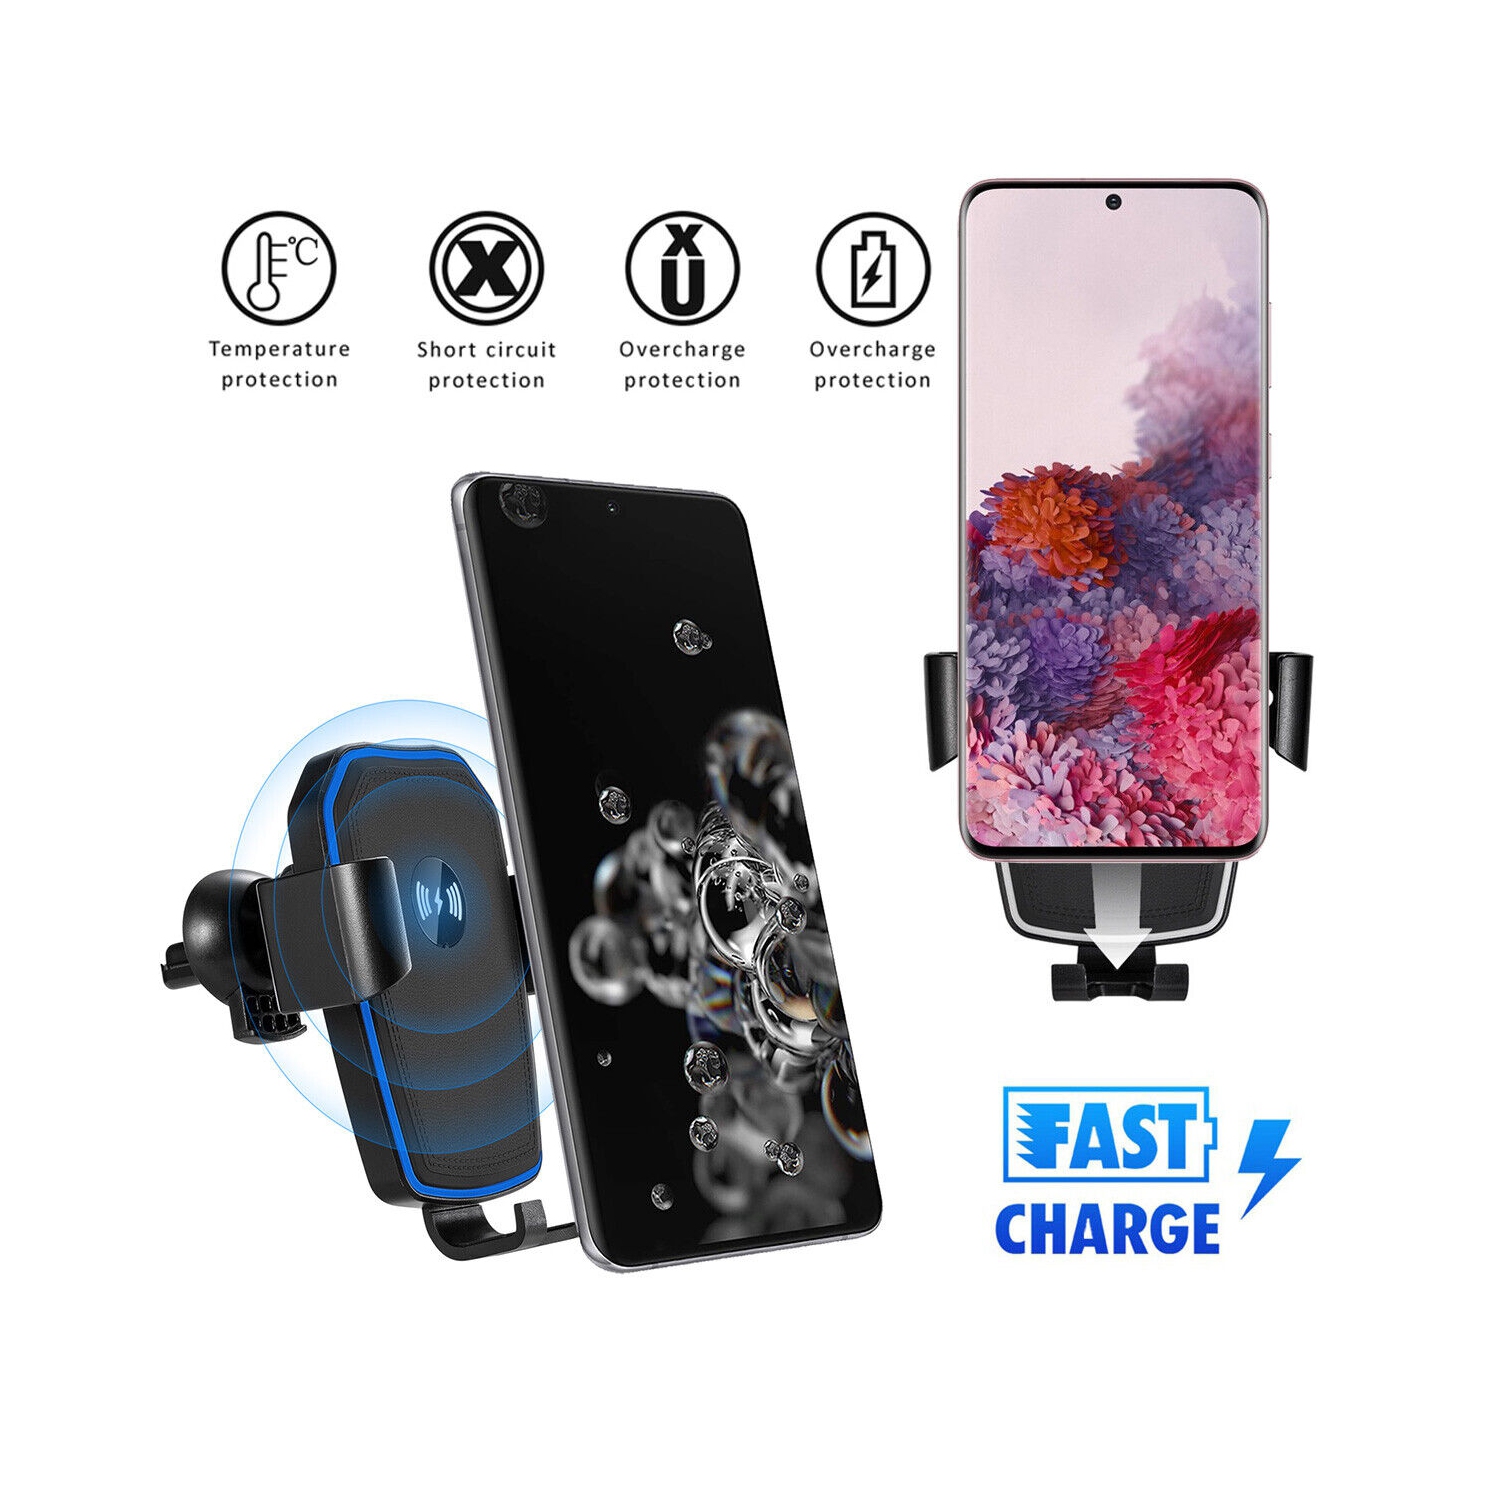 Qi 15W Wireless Fast Charging Car Charger Mount for Galaxy S20/S10, iPhone 12/11